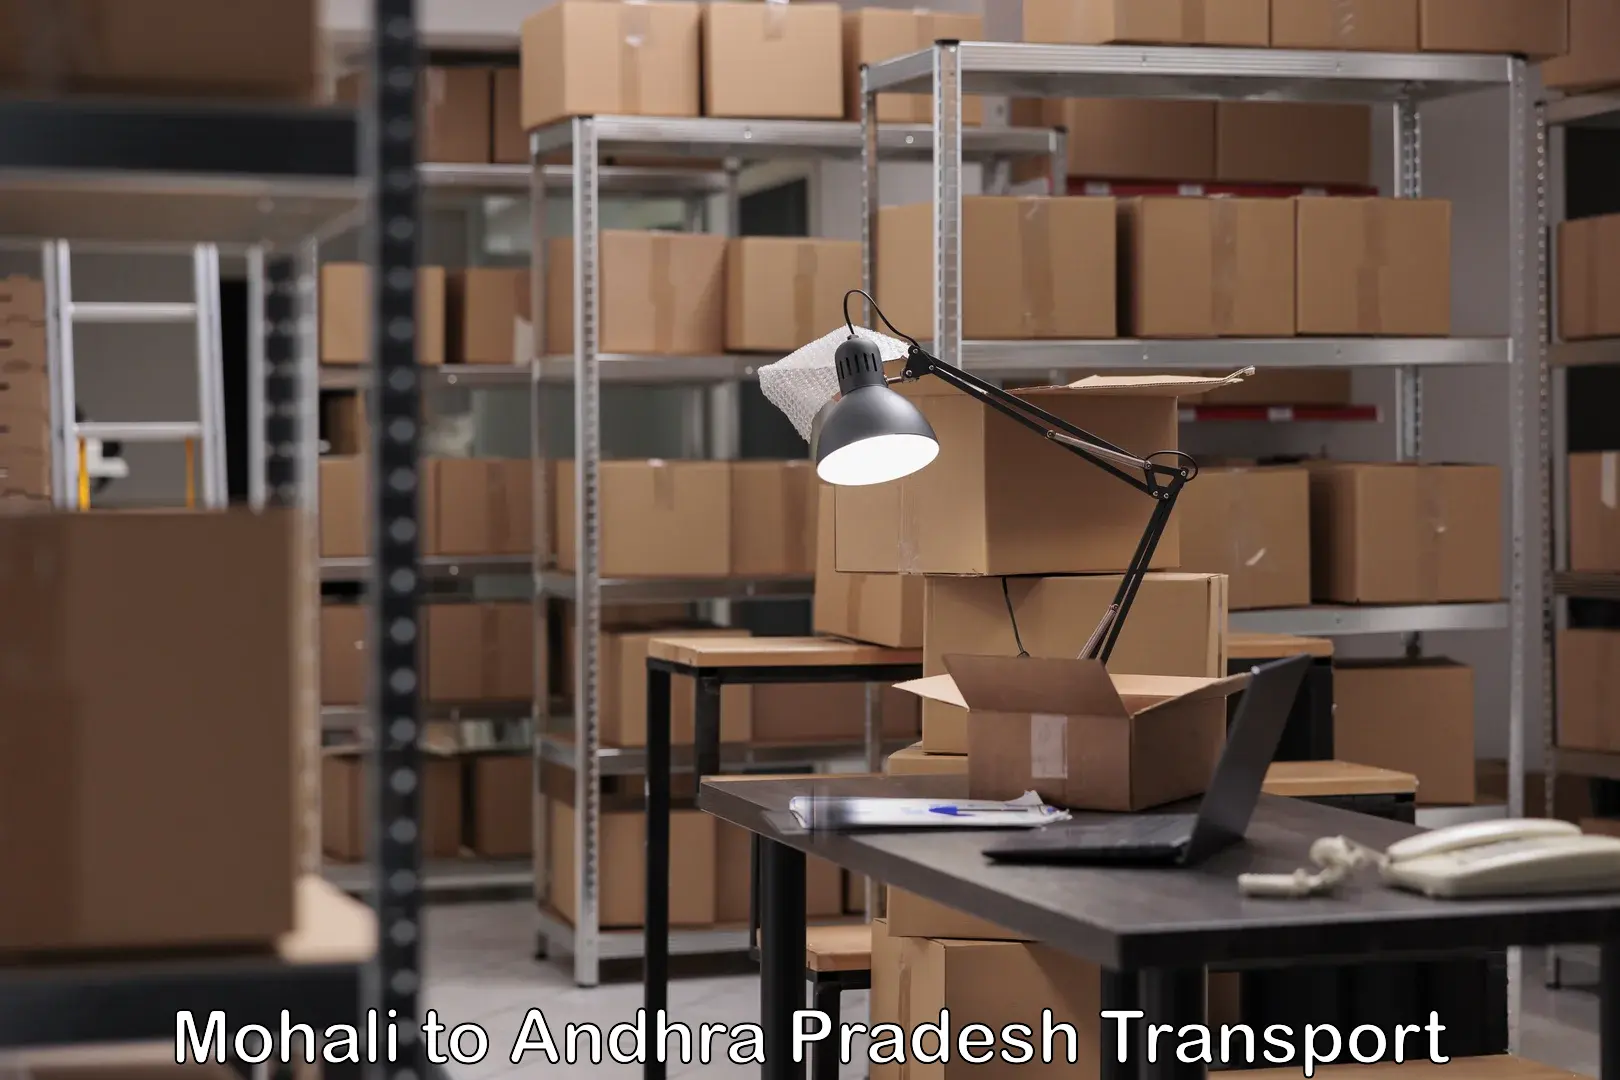 Daily parcel service transport Mohali to Andhra Pradesh